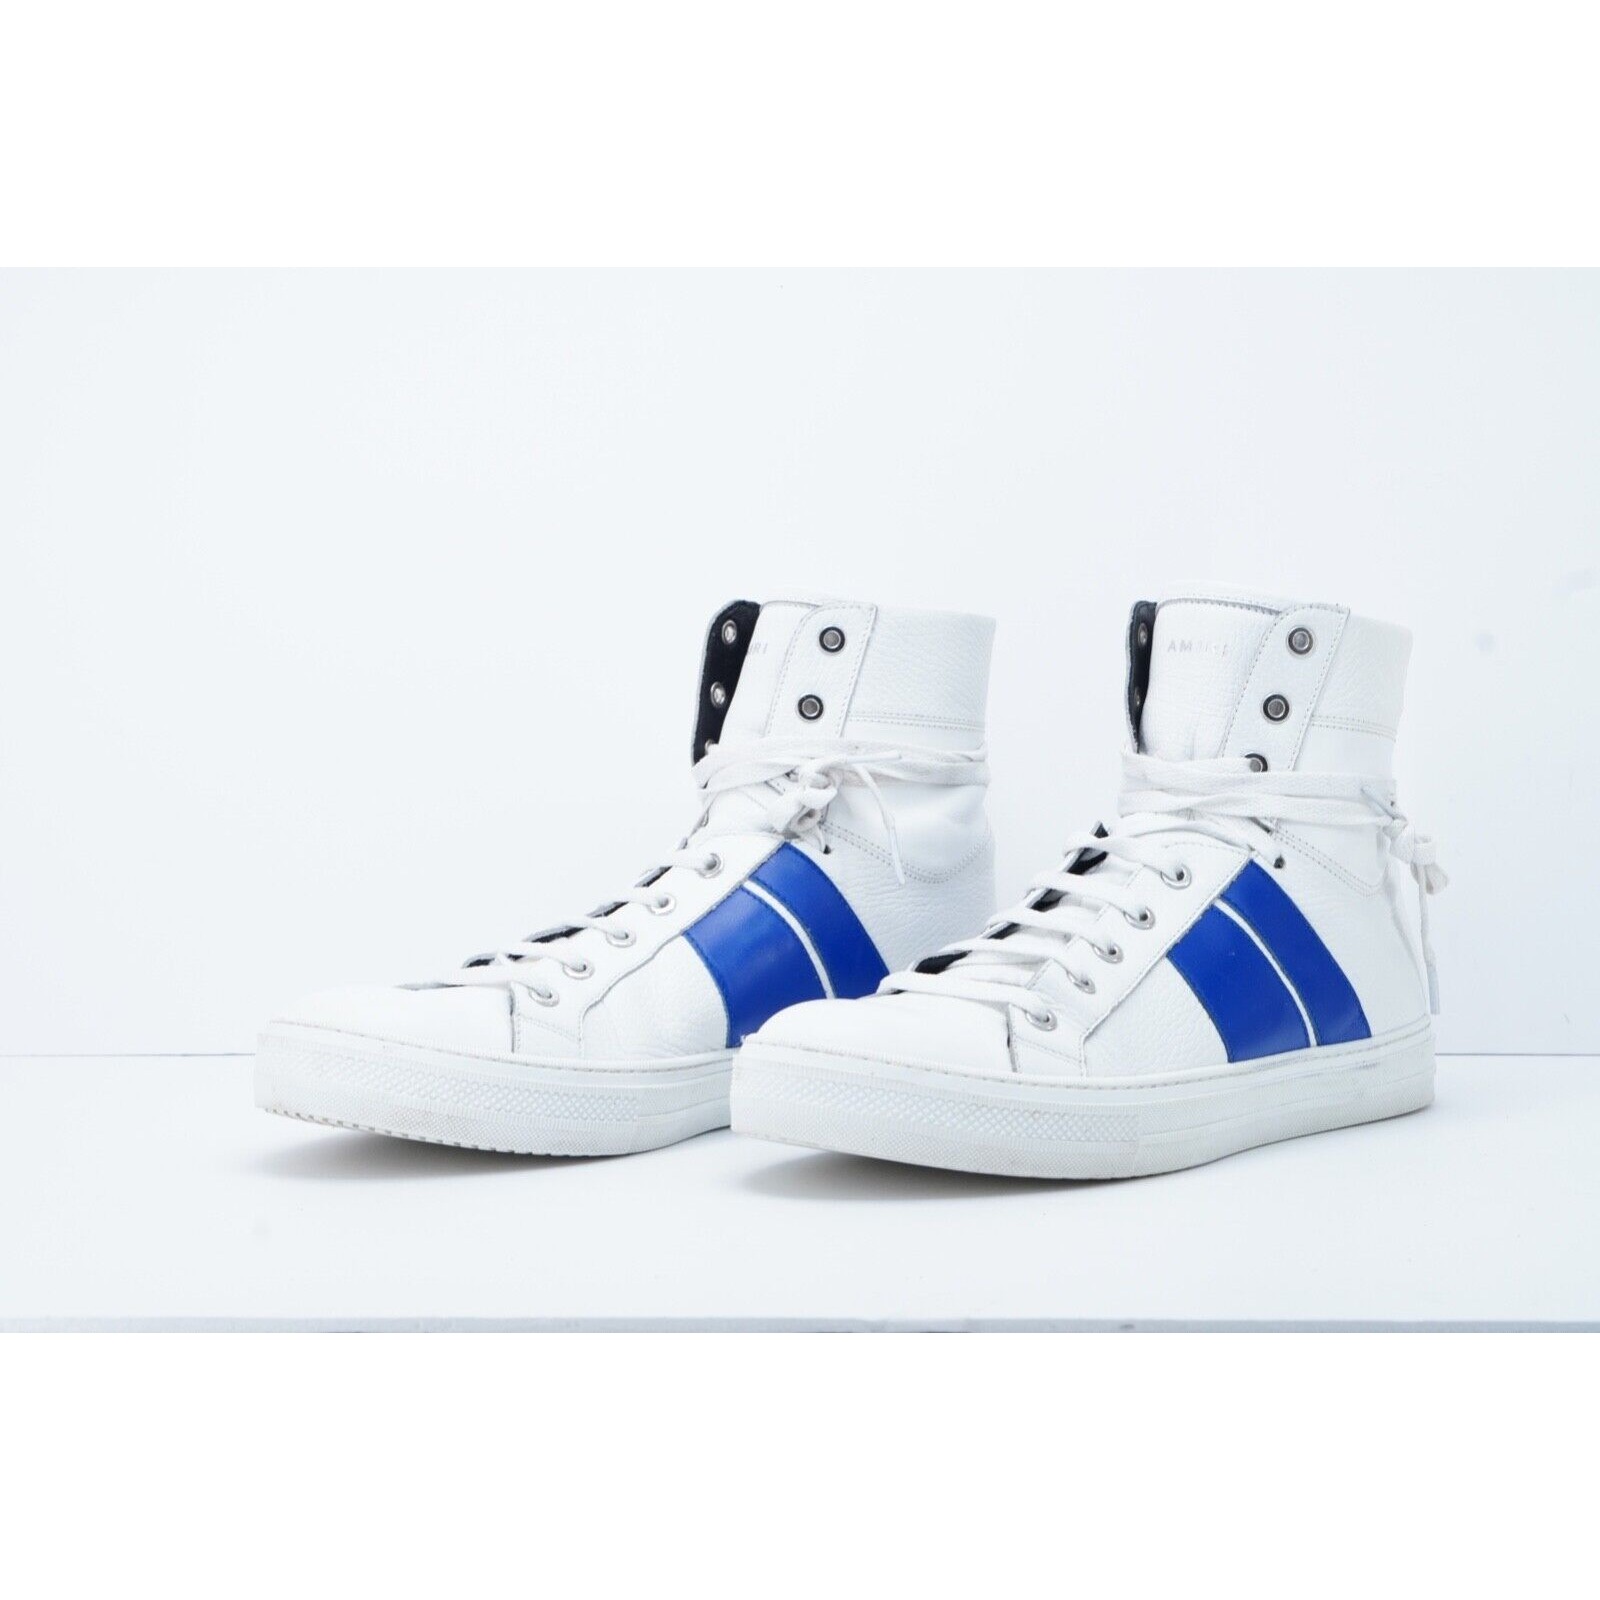 Amiri Sunset Sneakers White Blue High Top Lace Up $595 - Siz - 4